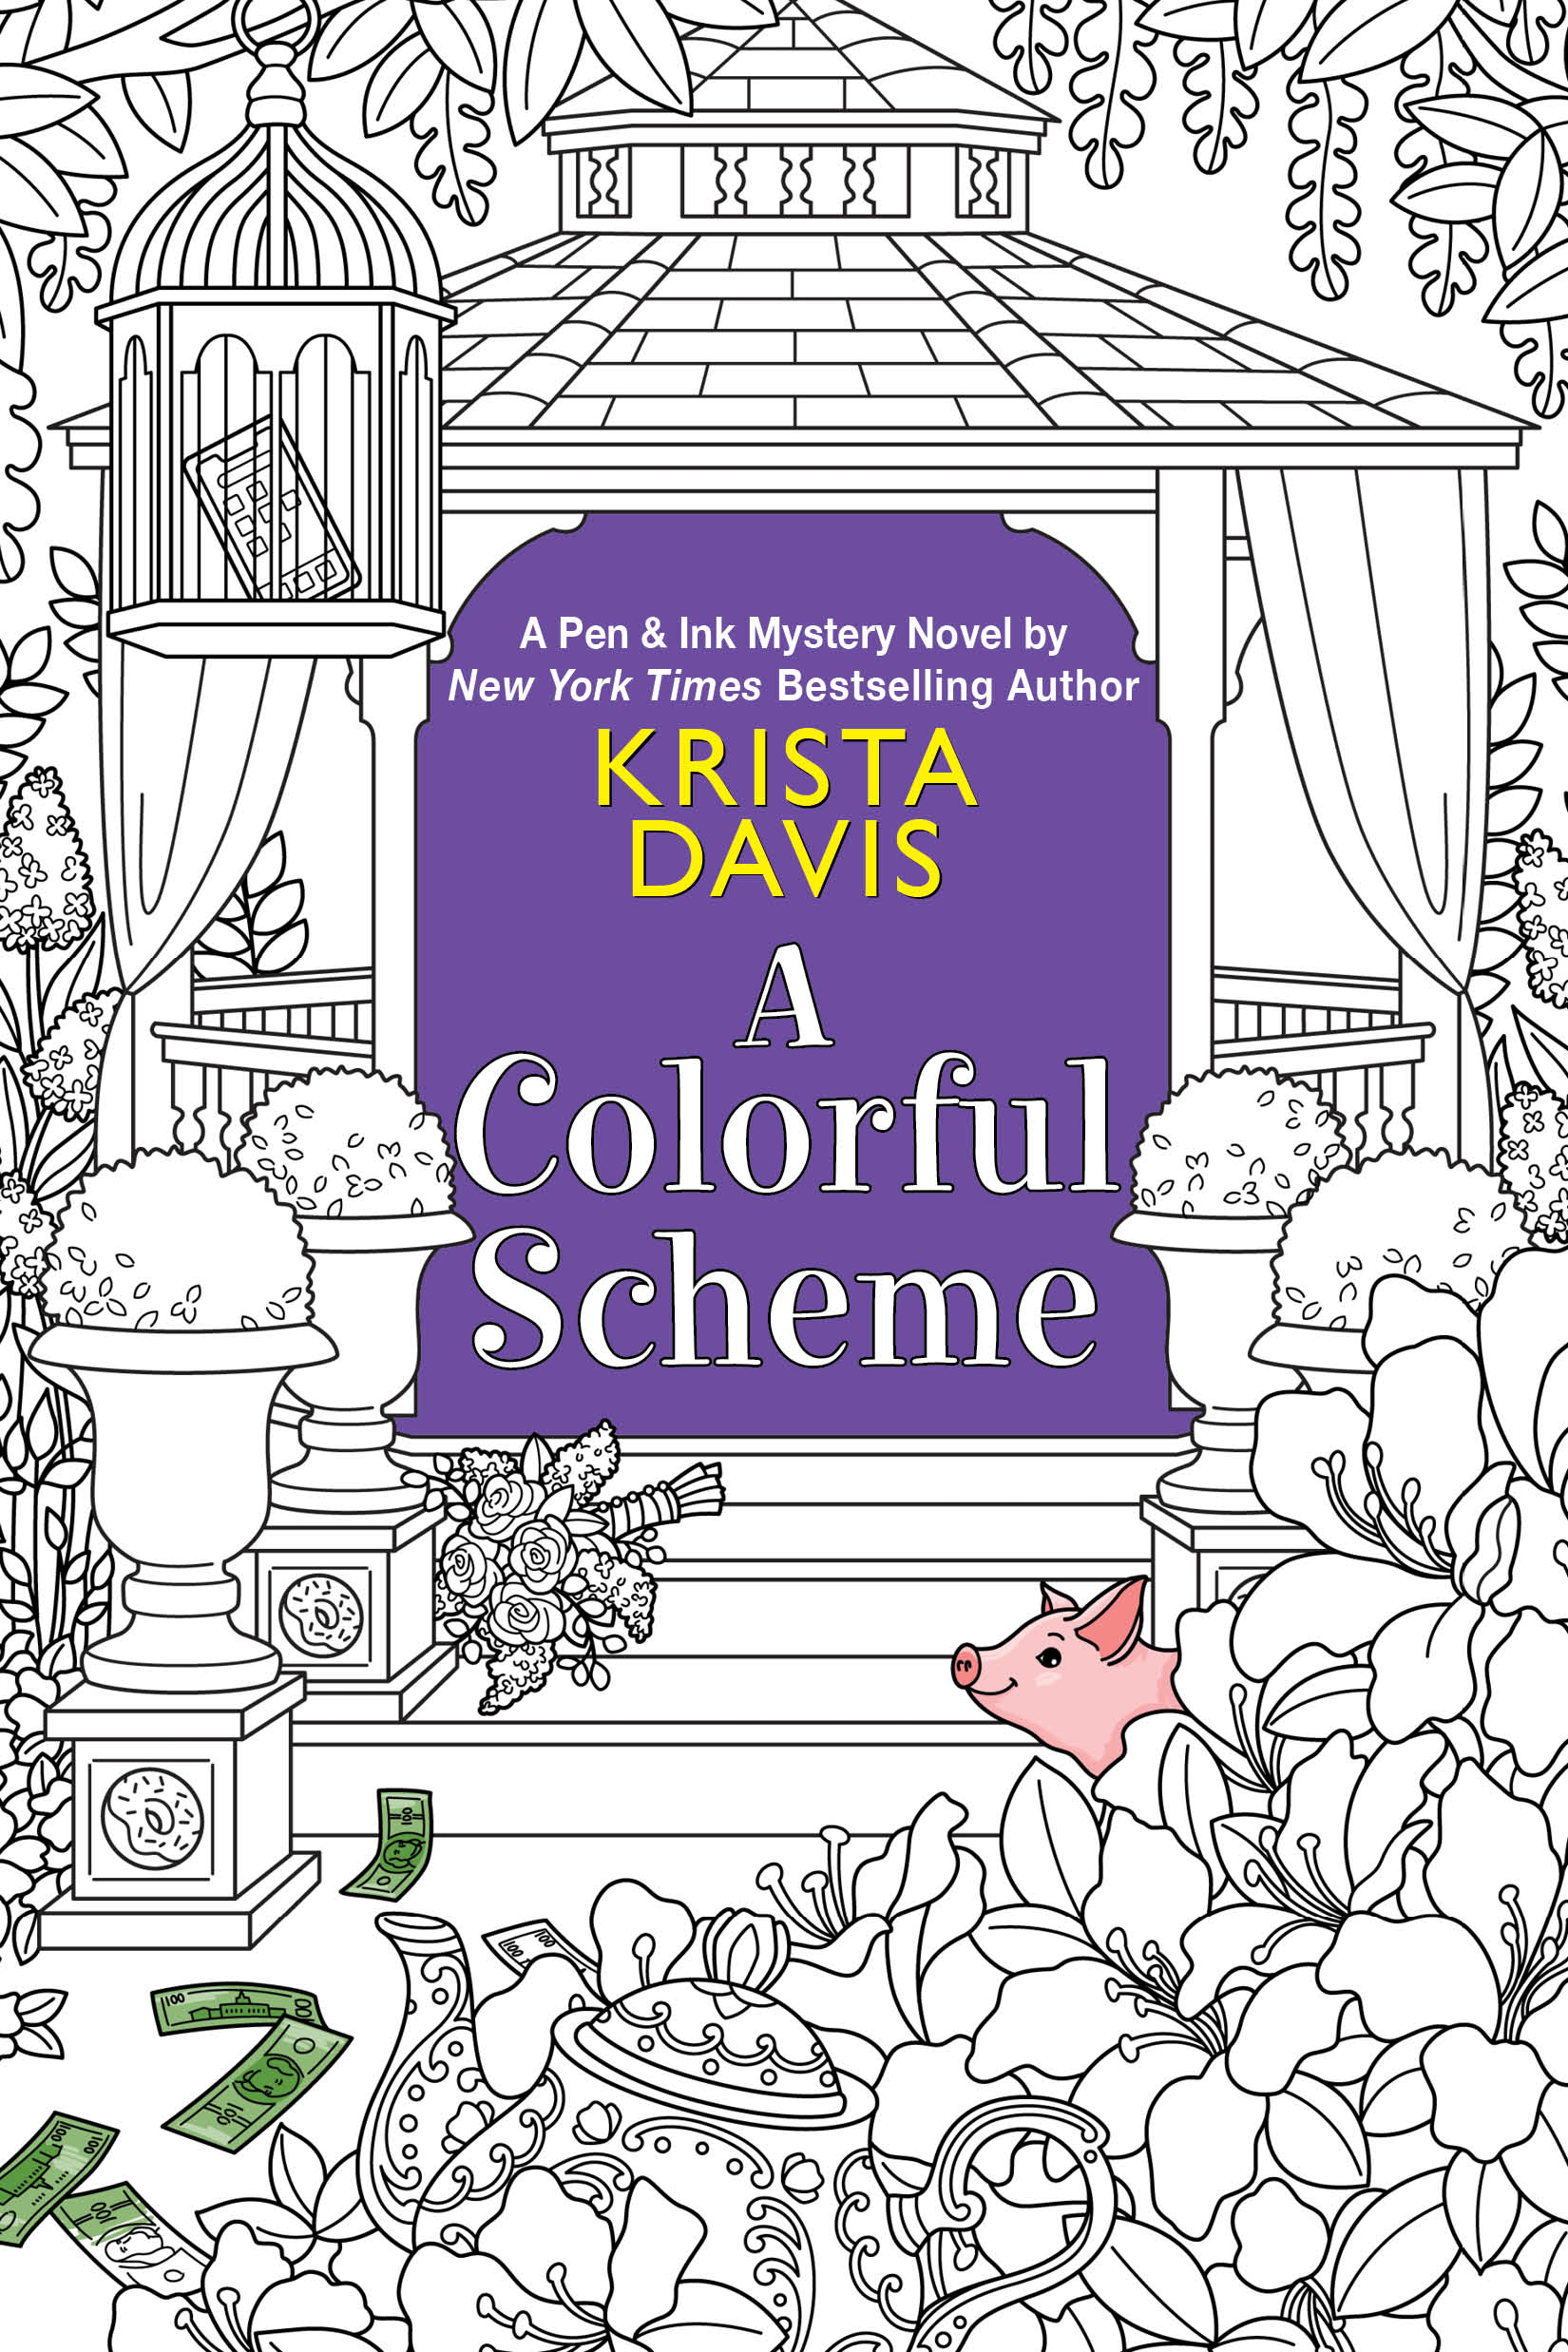 A Colorful Scheme, mystery novel with front and back covers you can color